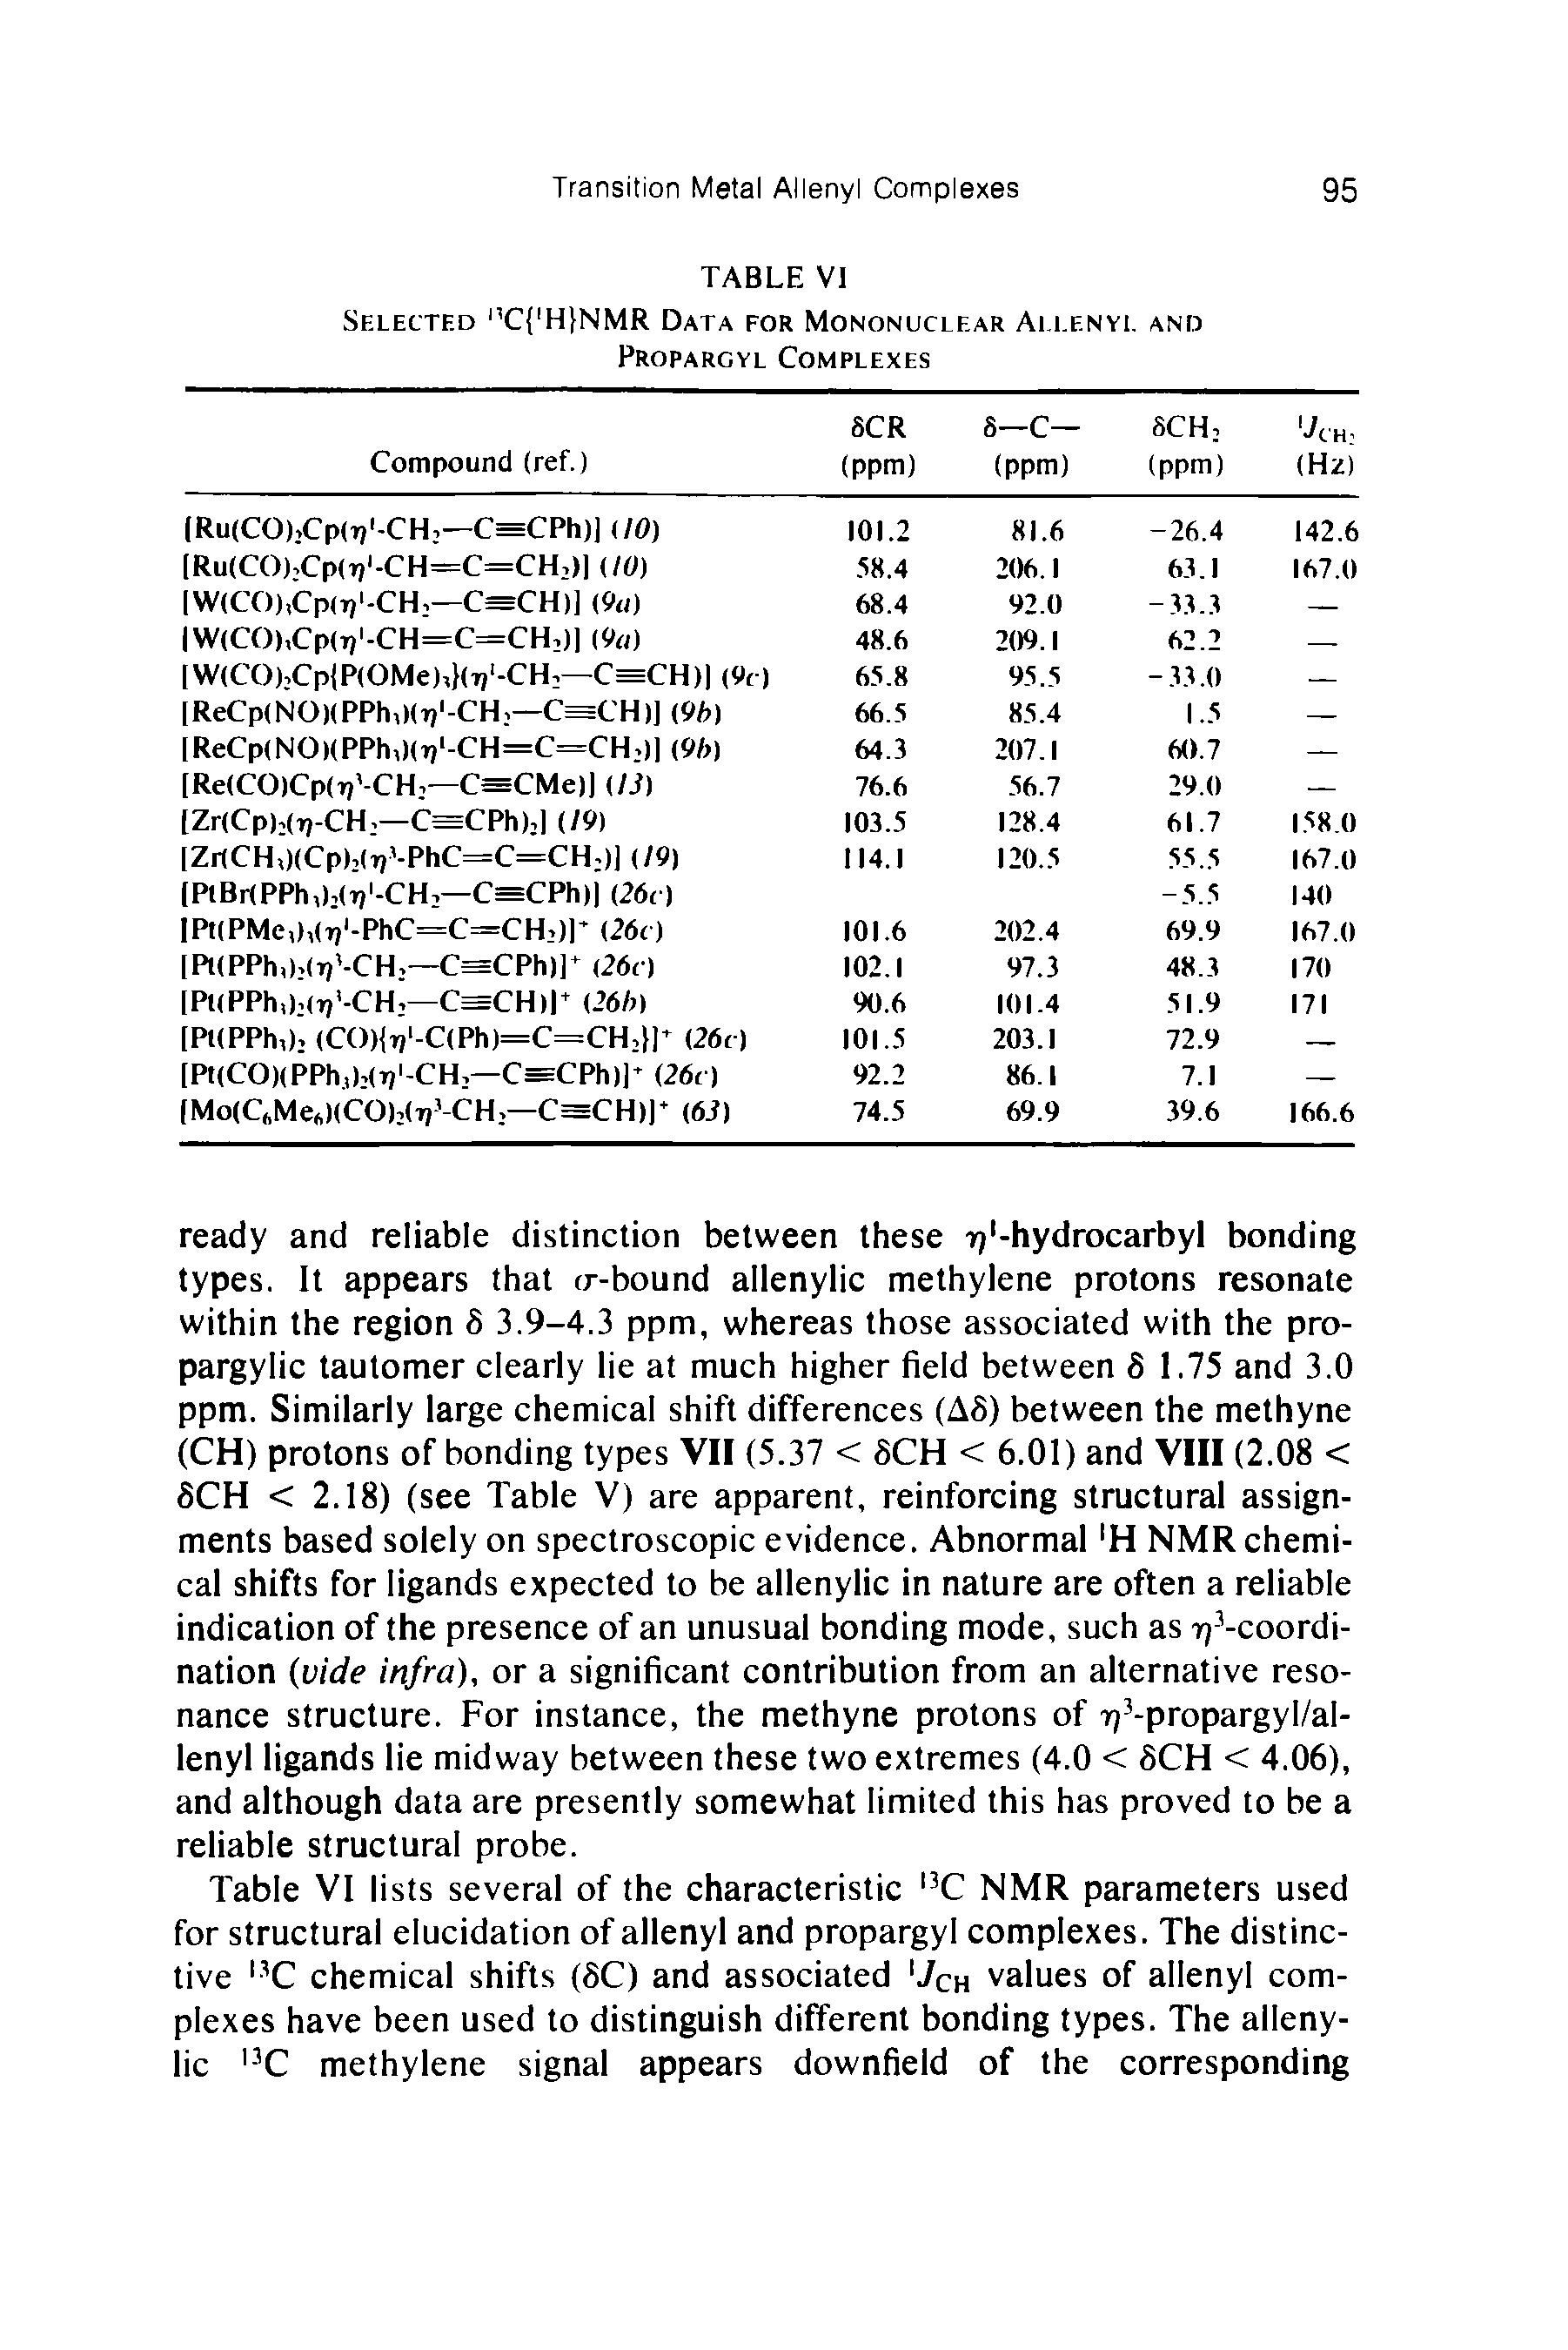 Table VI lists several of the characteristic C NMR parameters used for structural elucidation of allenyl and propargyl complexes. The distinctive C chemical shifts (8C) and associated Jch values of allenyl complexes have been used to distinguish different bonding types. The aileny-lic - C methylene signal appears downfield of the corresponding...